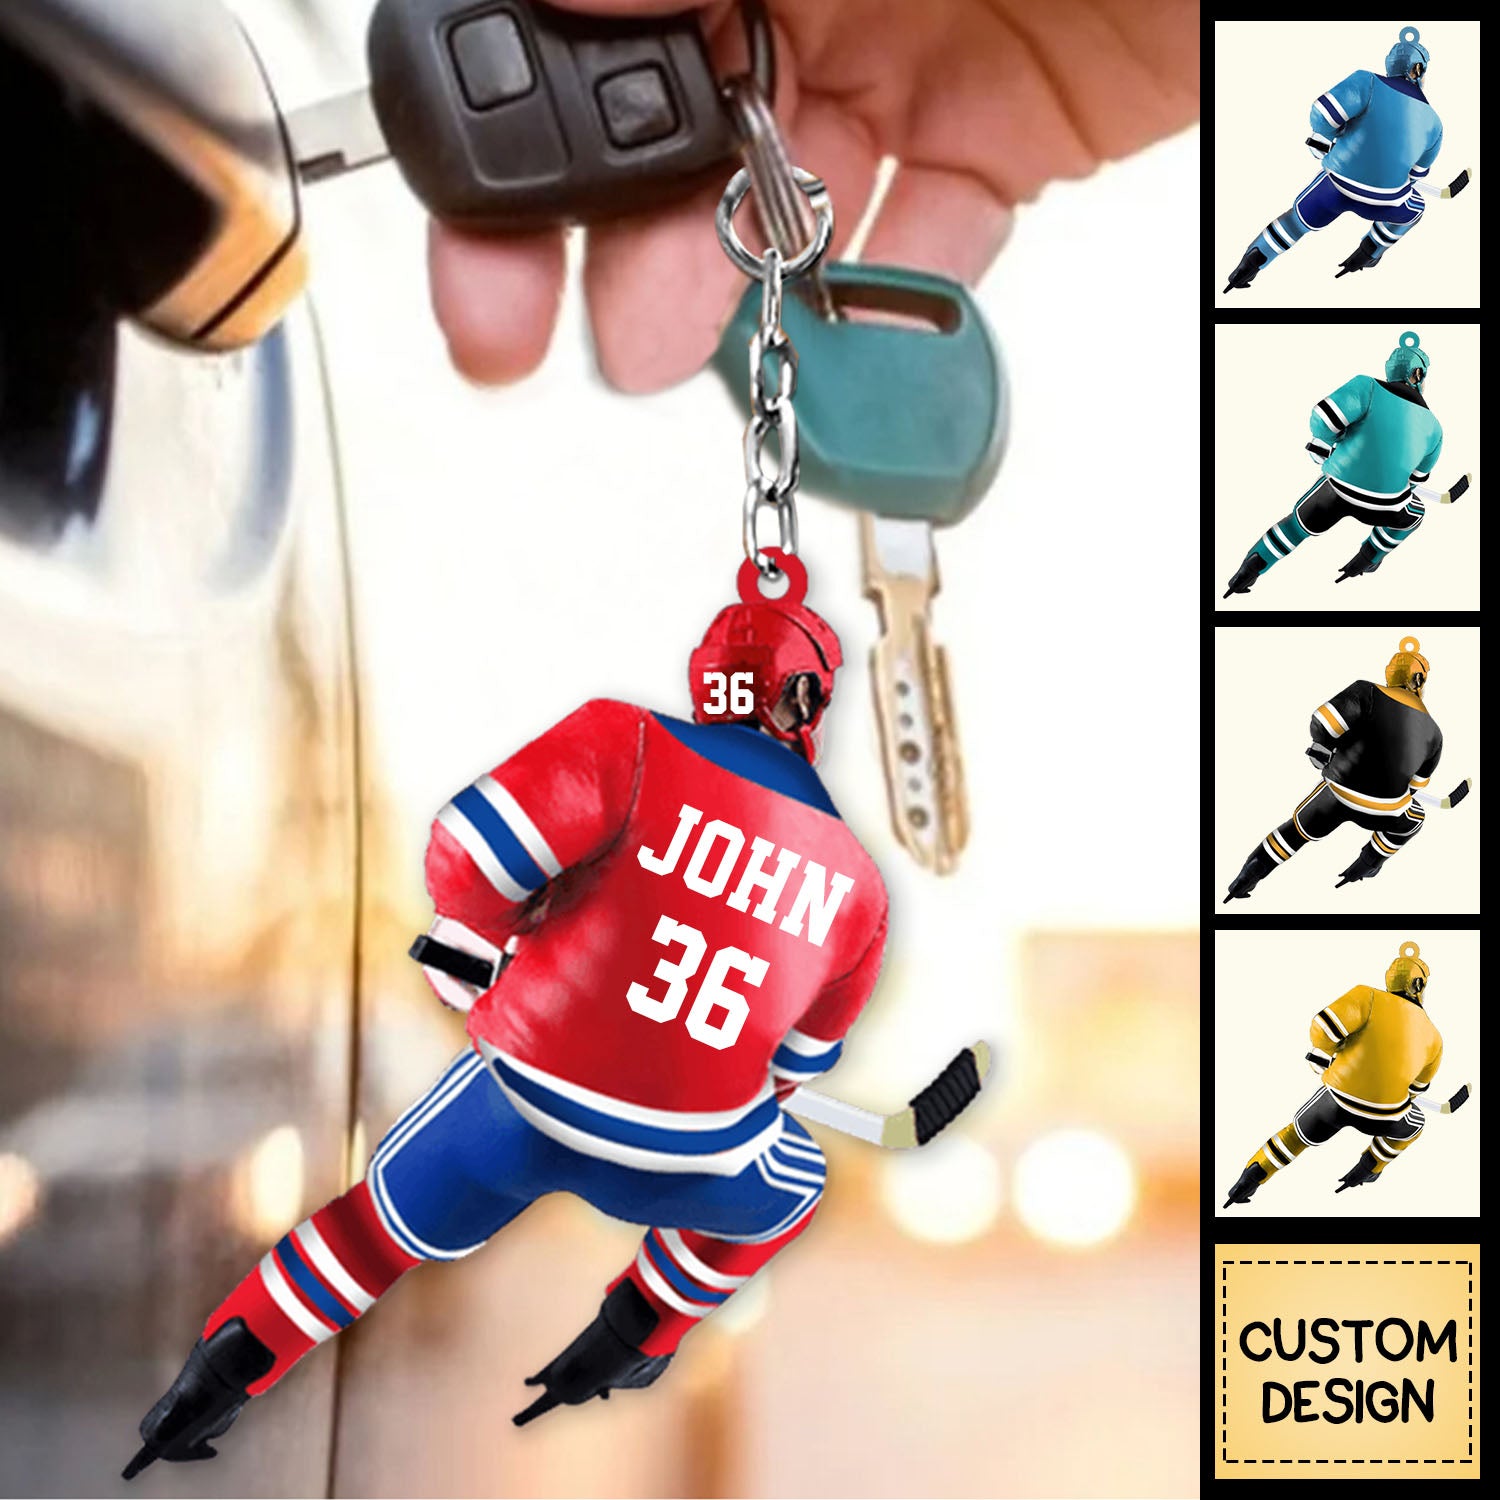 Personalized Ice Hockey Player Acrylic Keychain-Great Gift Idea For Ice Hockey Lovers